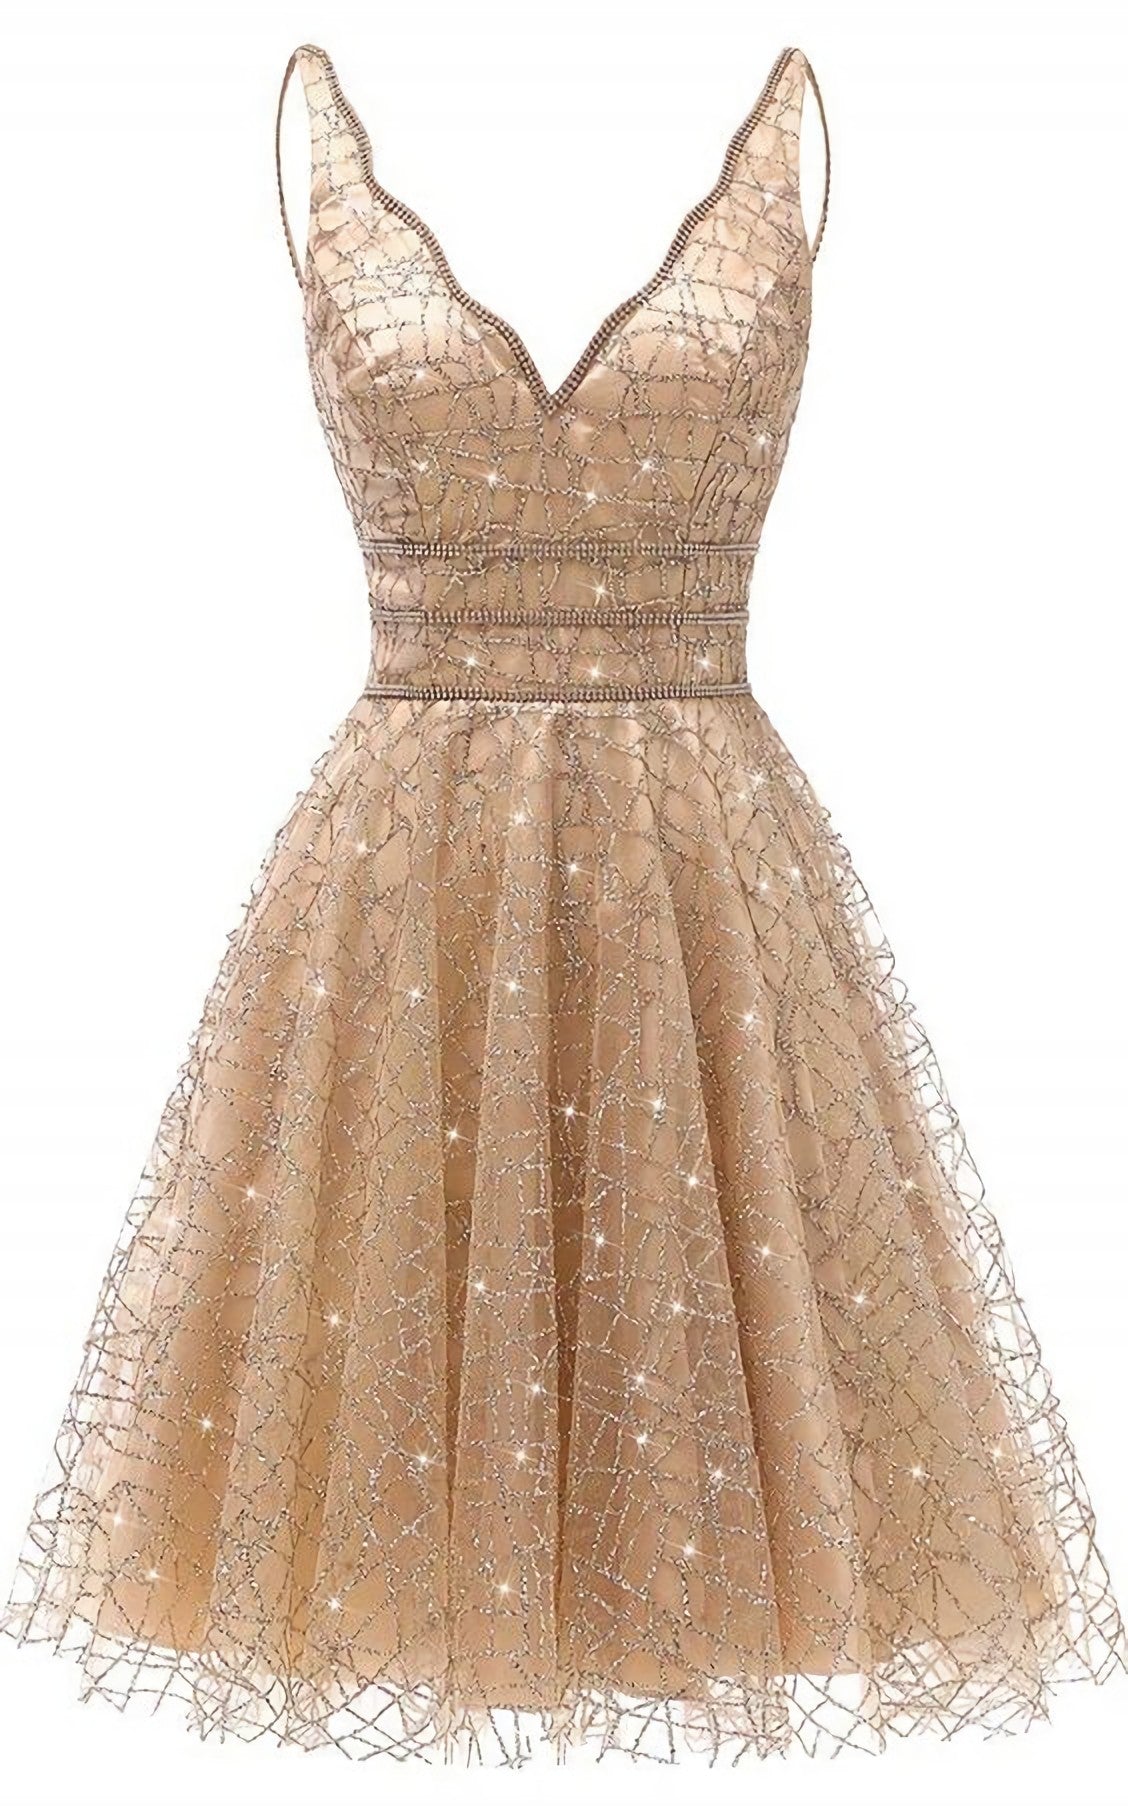 A Line V Neck Knee Length Gold Sequins Corset Homecoming Dress, With Beading outfit, Prom Dresses Princess Style